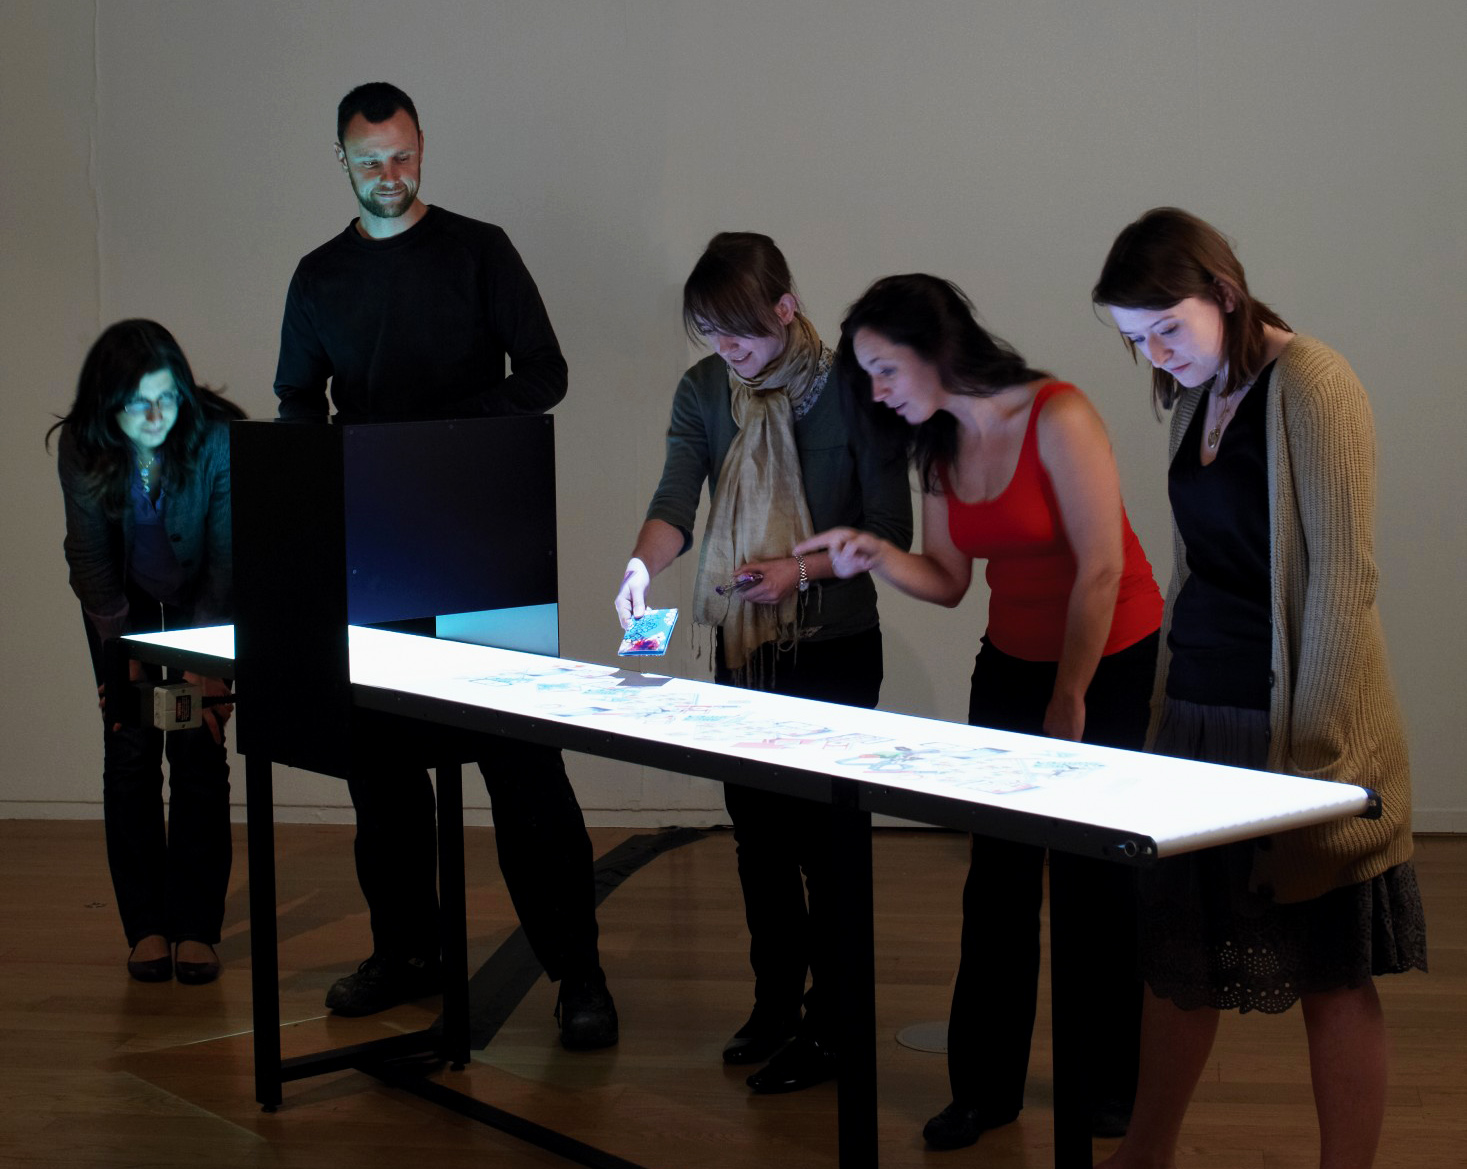 Several people interacting with a digital artwork.